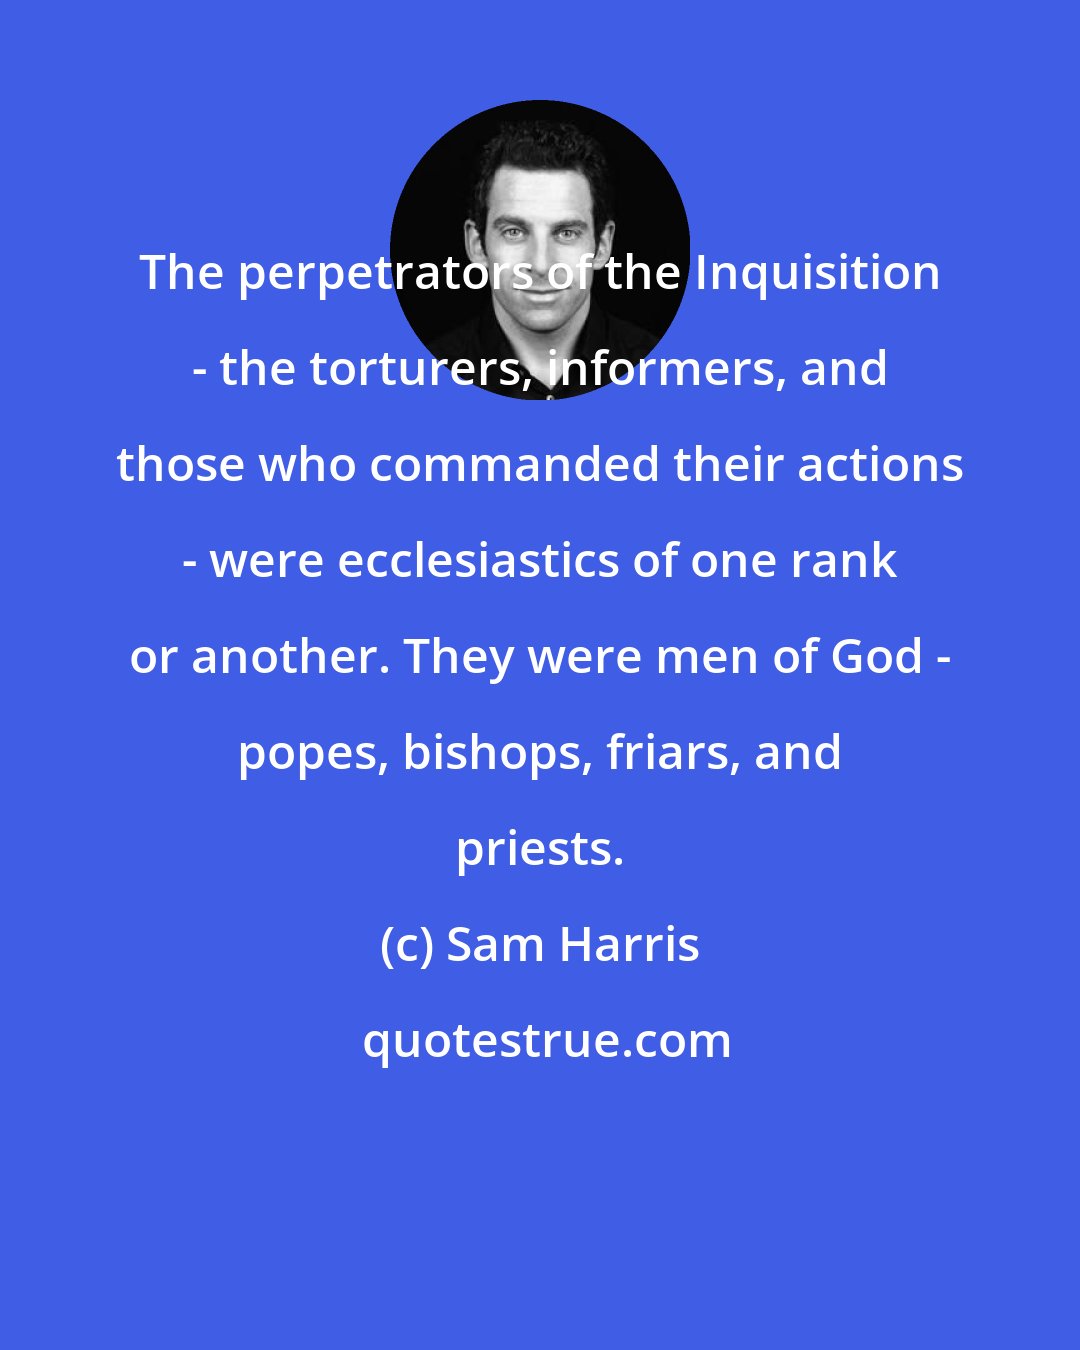 Sam Harris: The perpetrators of the Inquisition - the torturers, informers, and those who commanded their actions - were ecclesiastics of one rank or another. They were men of God - popes, bishops, friars, and priests.